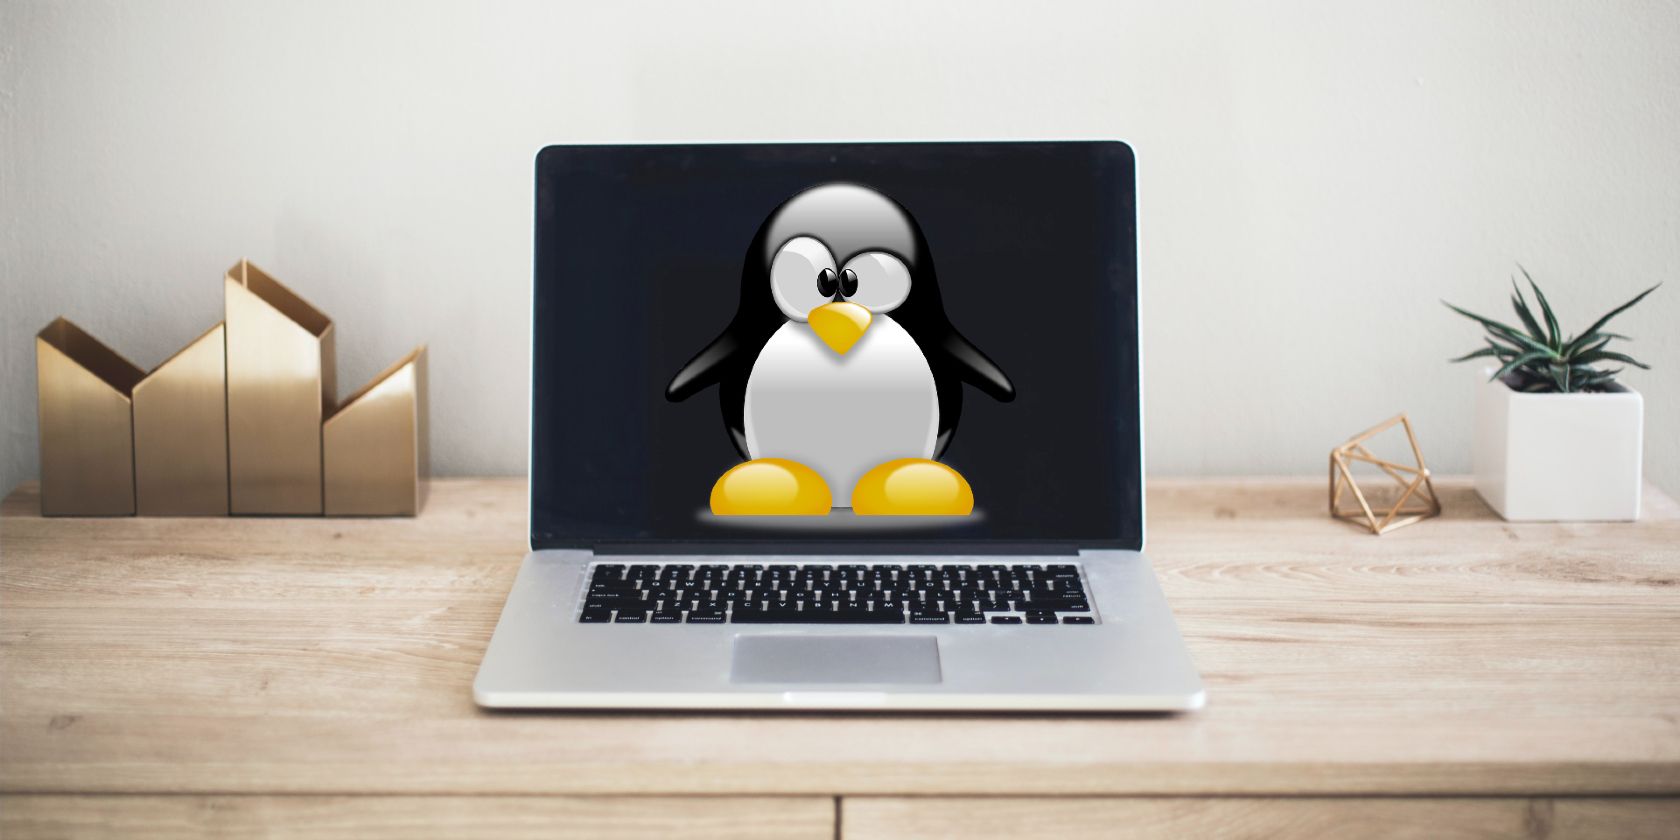 9 New Linux Distros to Try Out in 2022